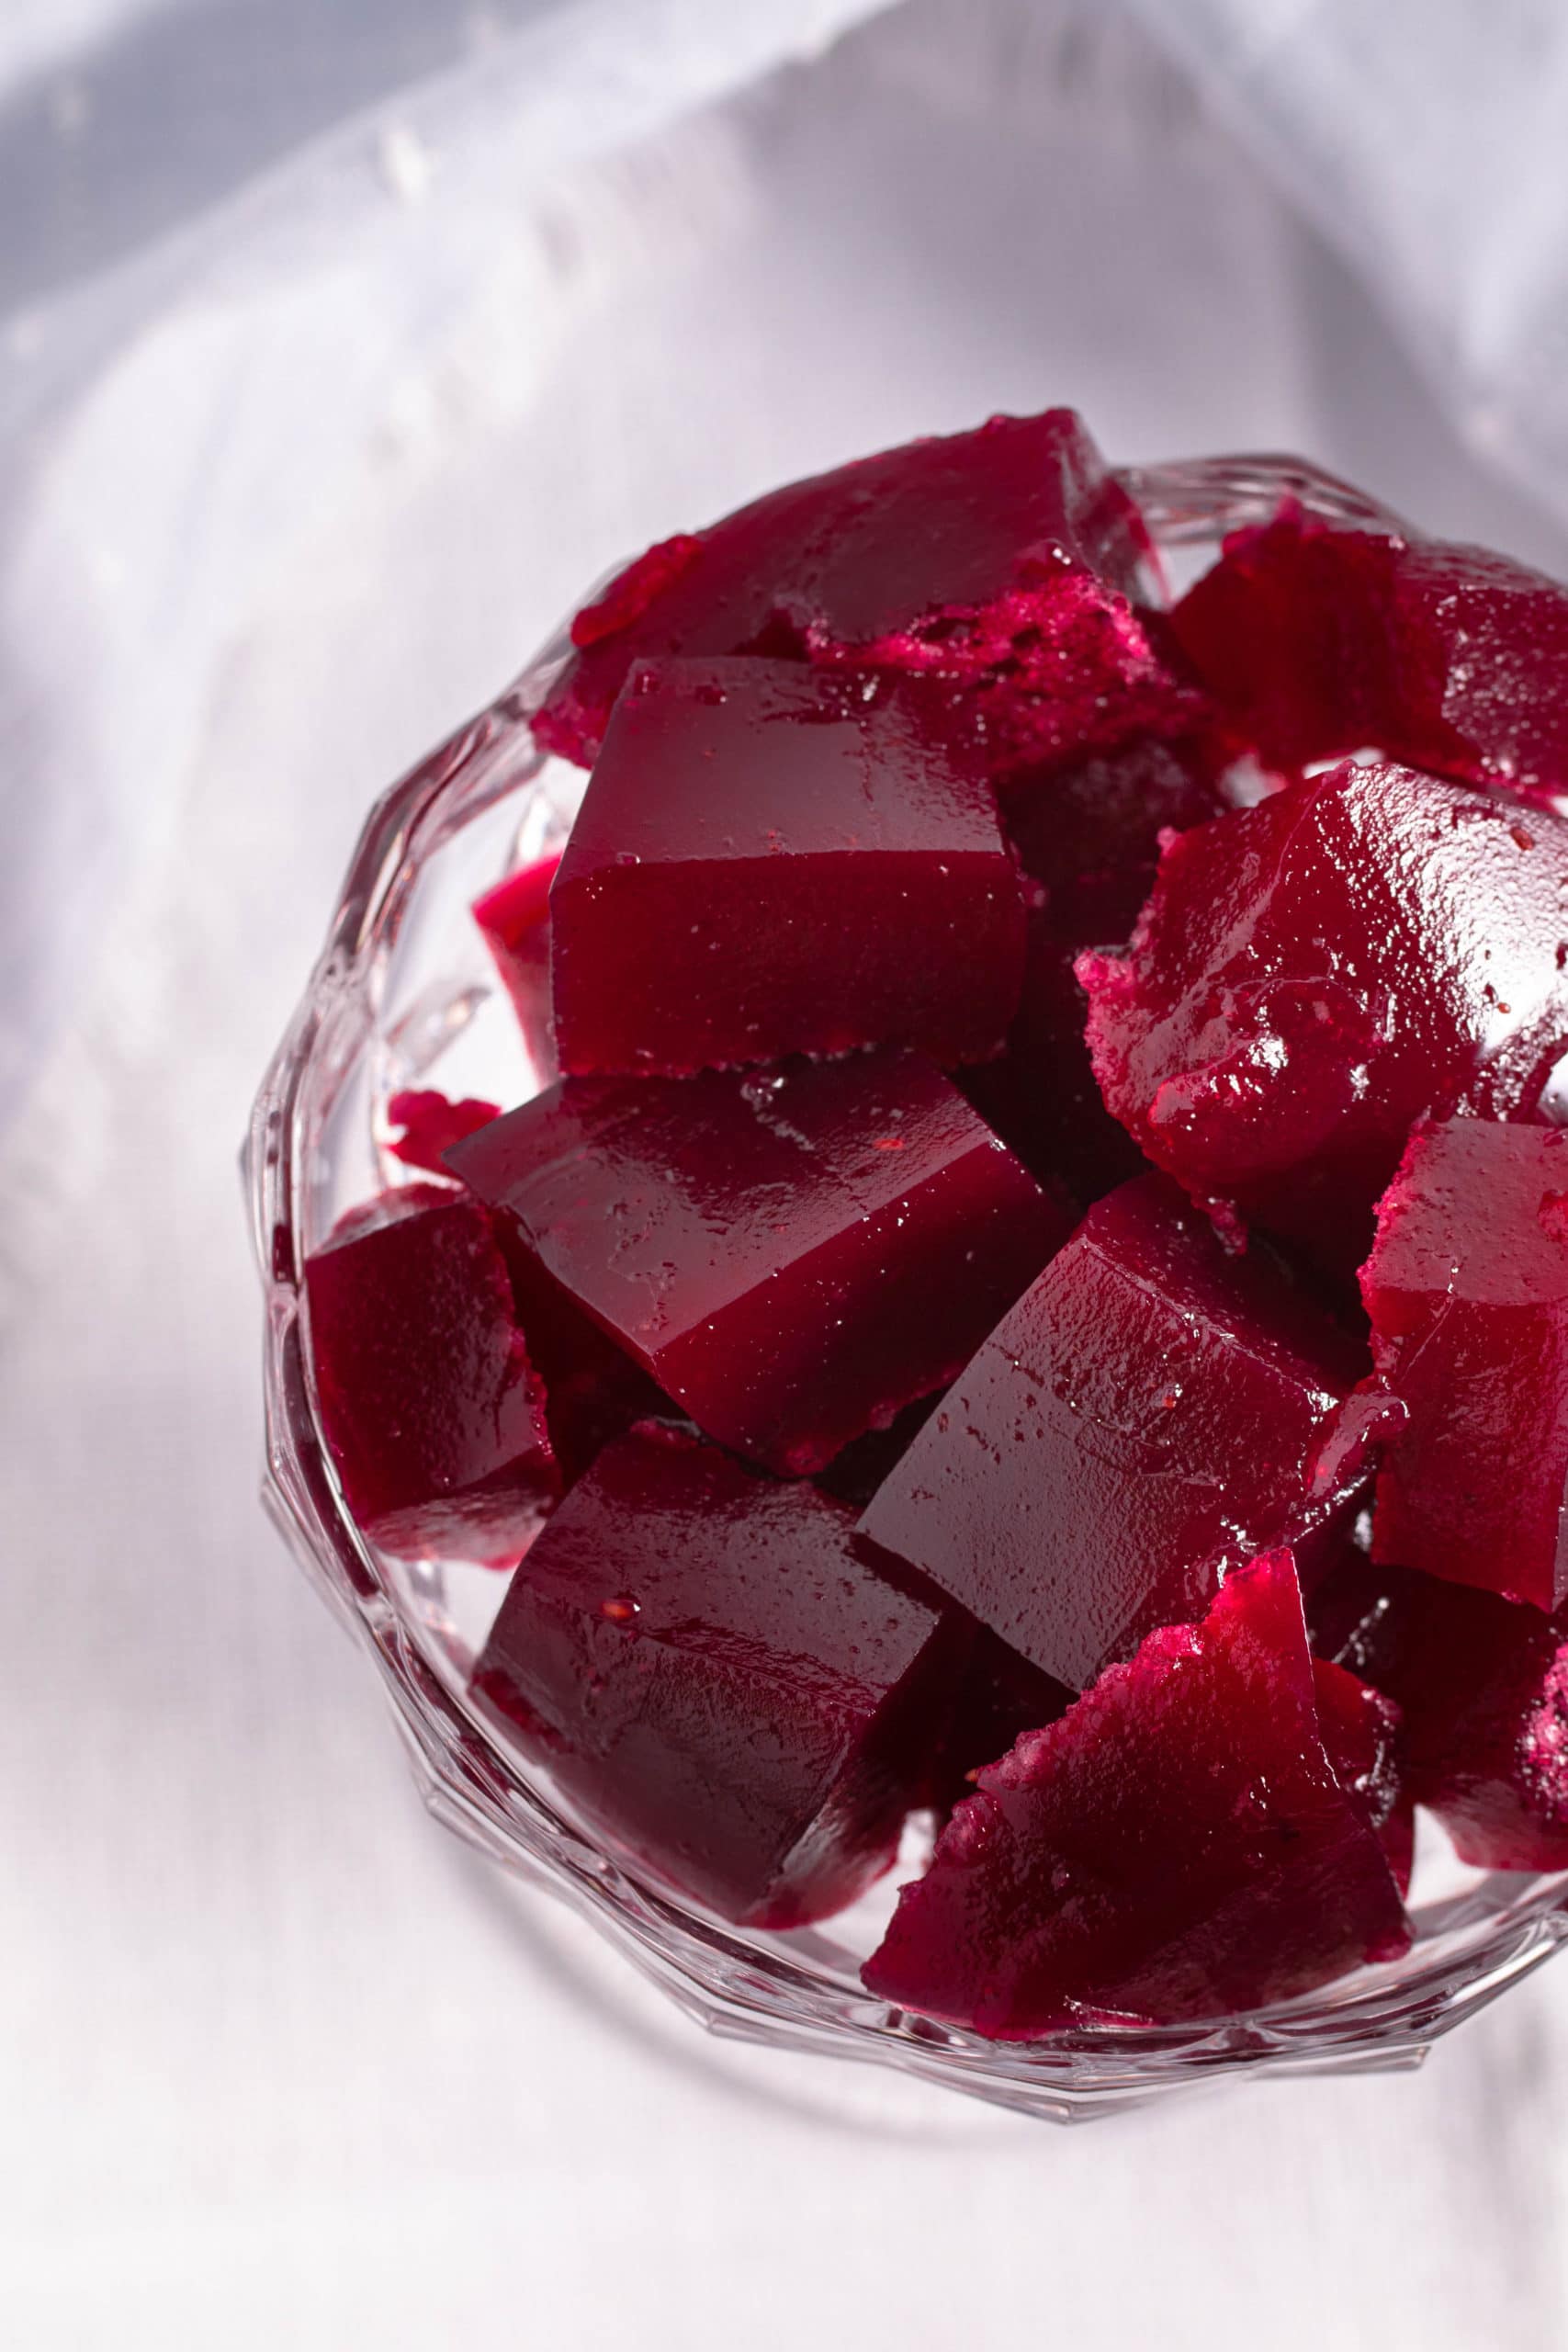 Homemade jello jigglers are a healthy kid friendly treat that is zero added sugar.